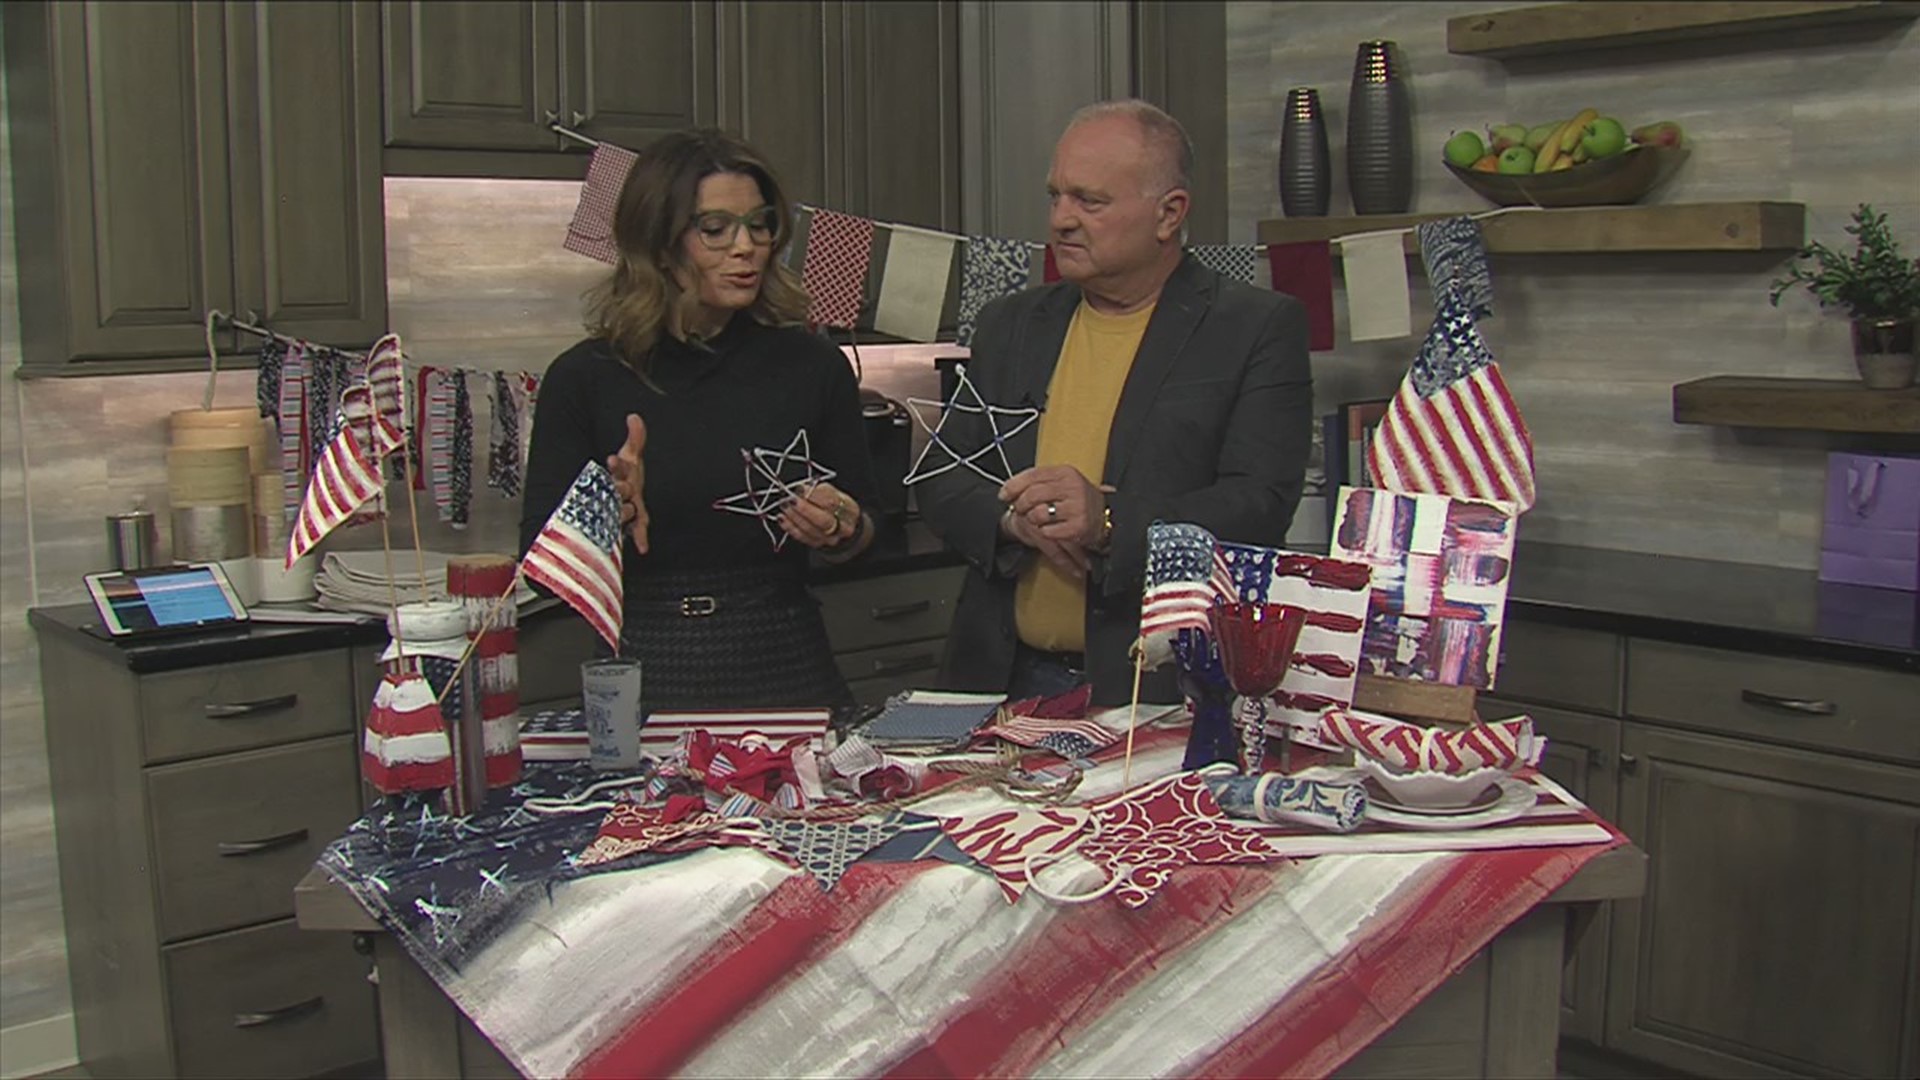 Decorating with a patriotic theme